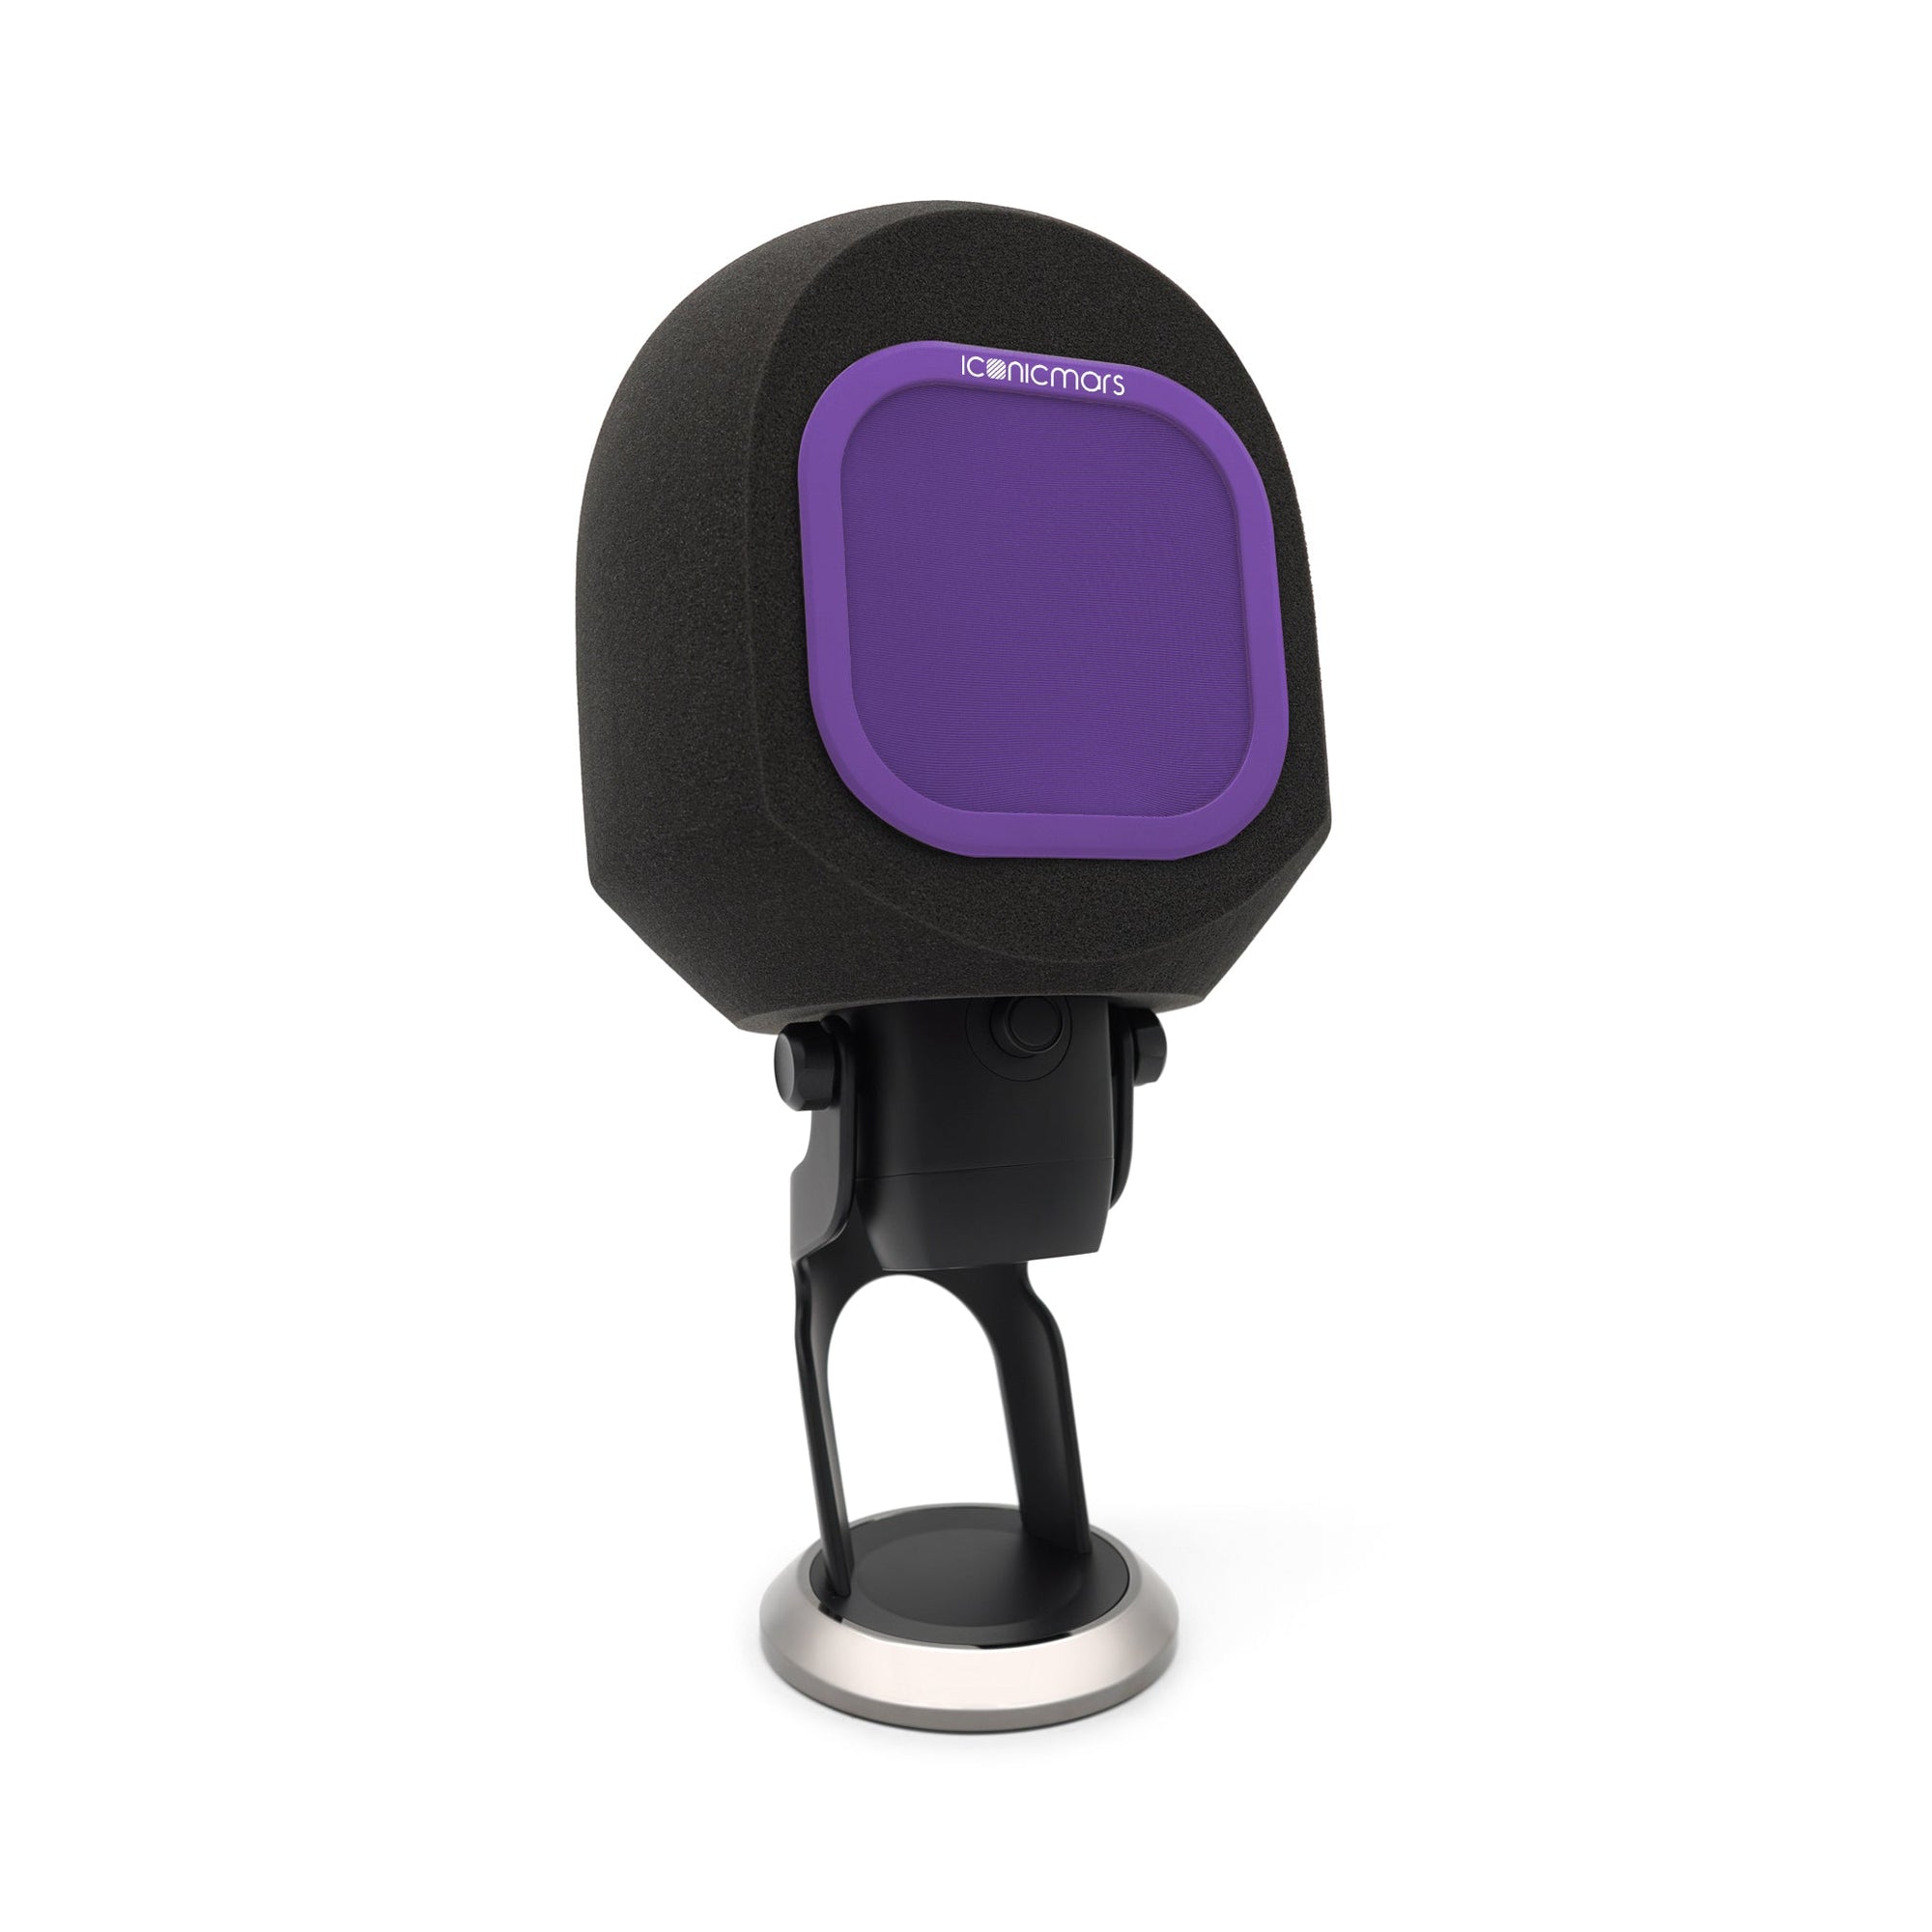 Comet X isolation foam cover with filter for large diameter mics for noise canceling background protection  -- Purple Berry